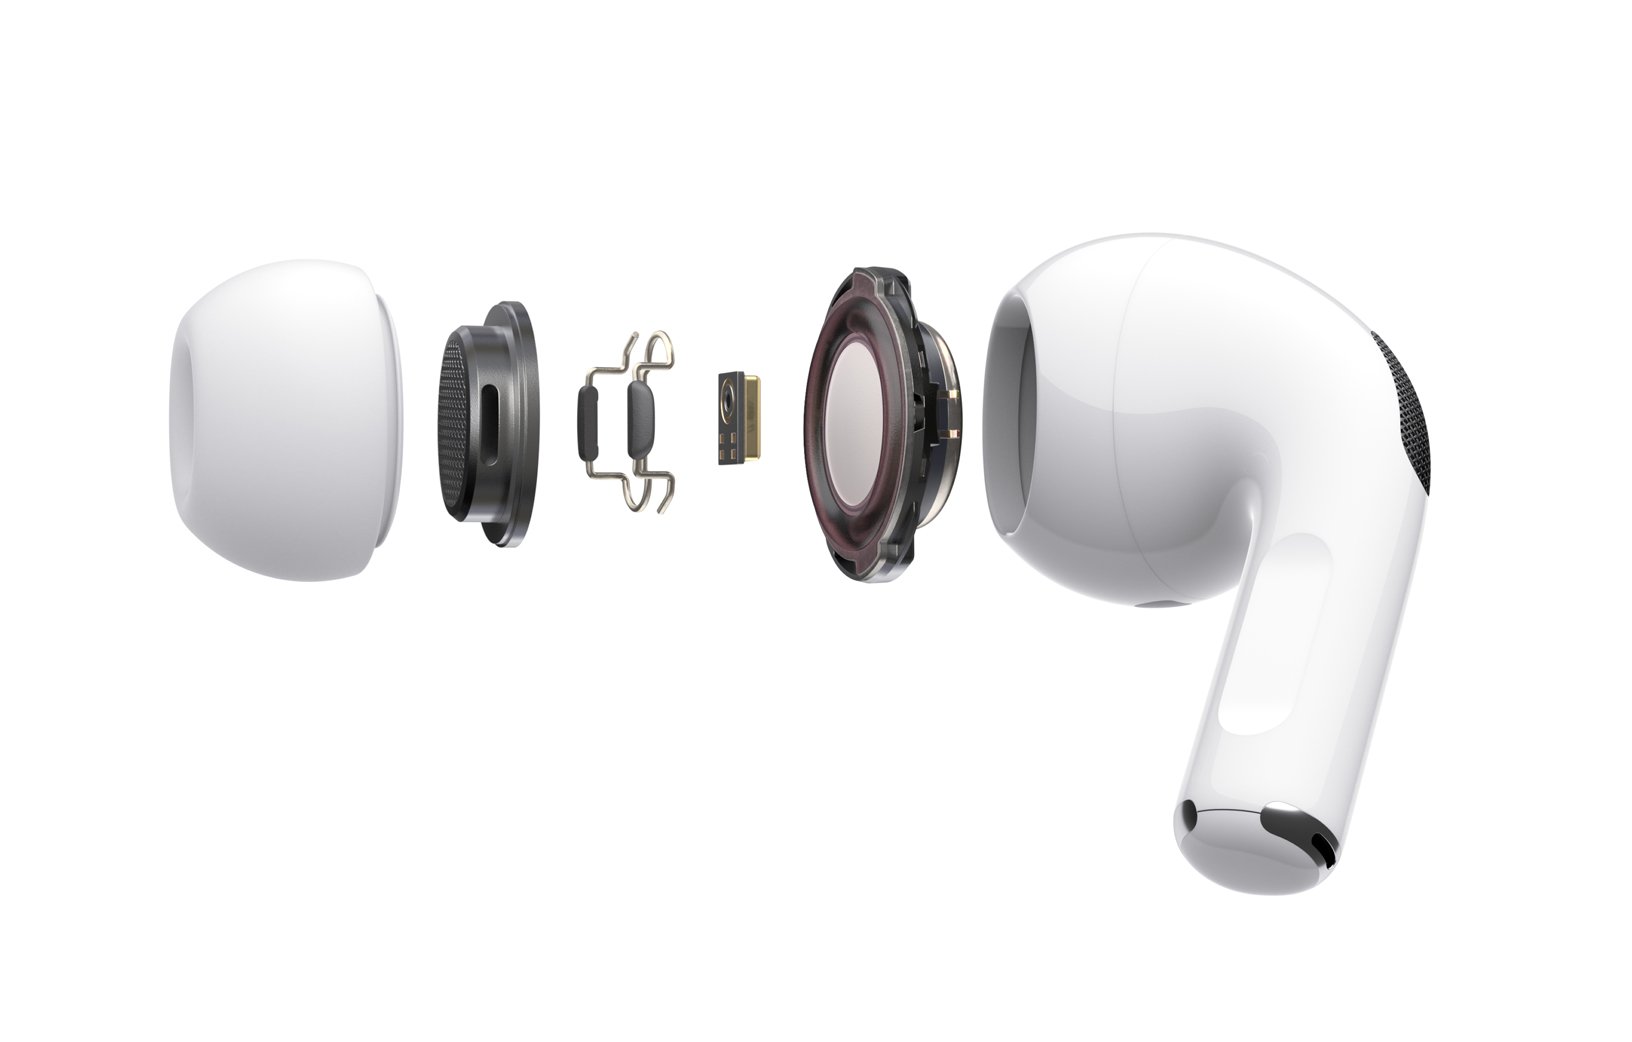 4816712_Apple_AirPods-Pro_Expanded_102819_big.jpg.large_2x.jpg